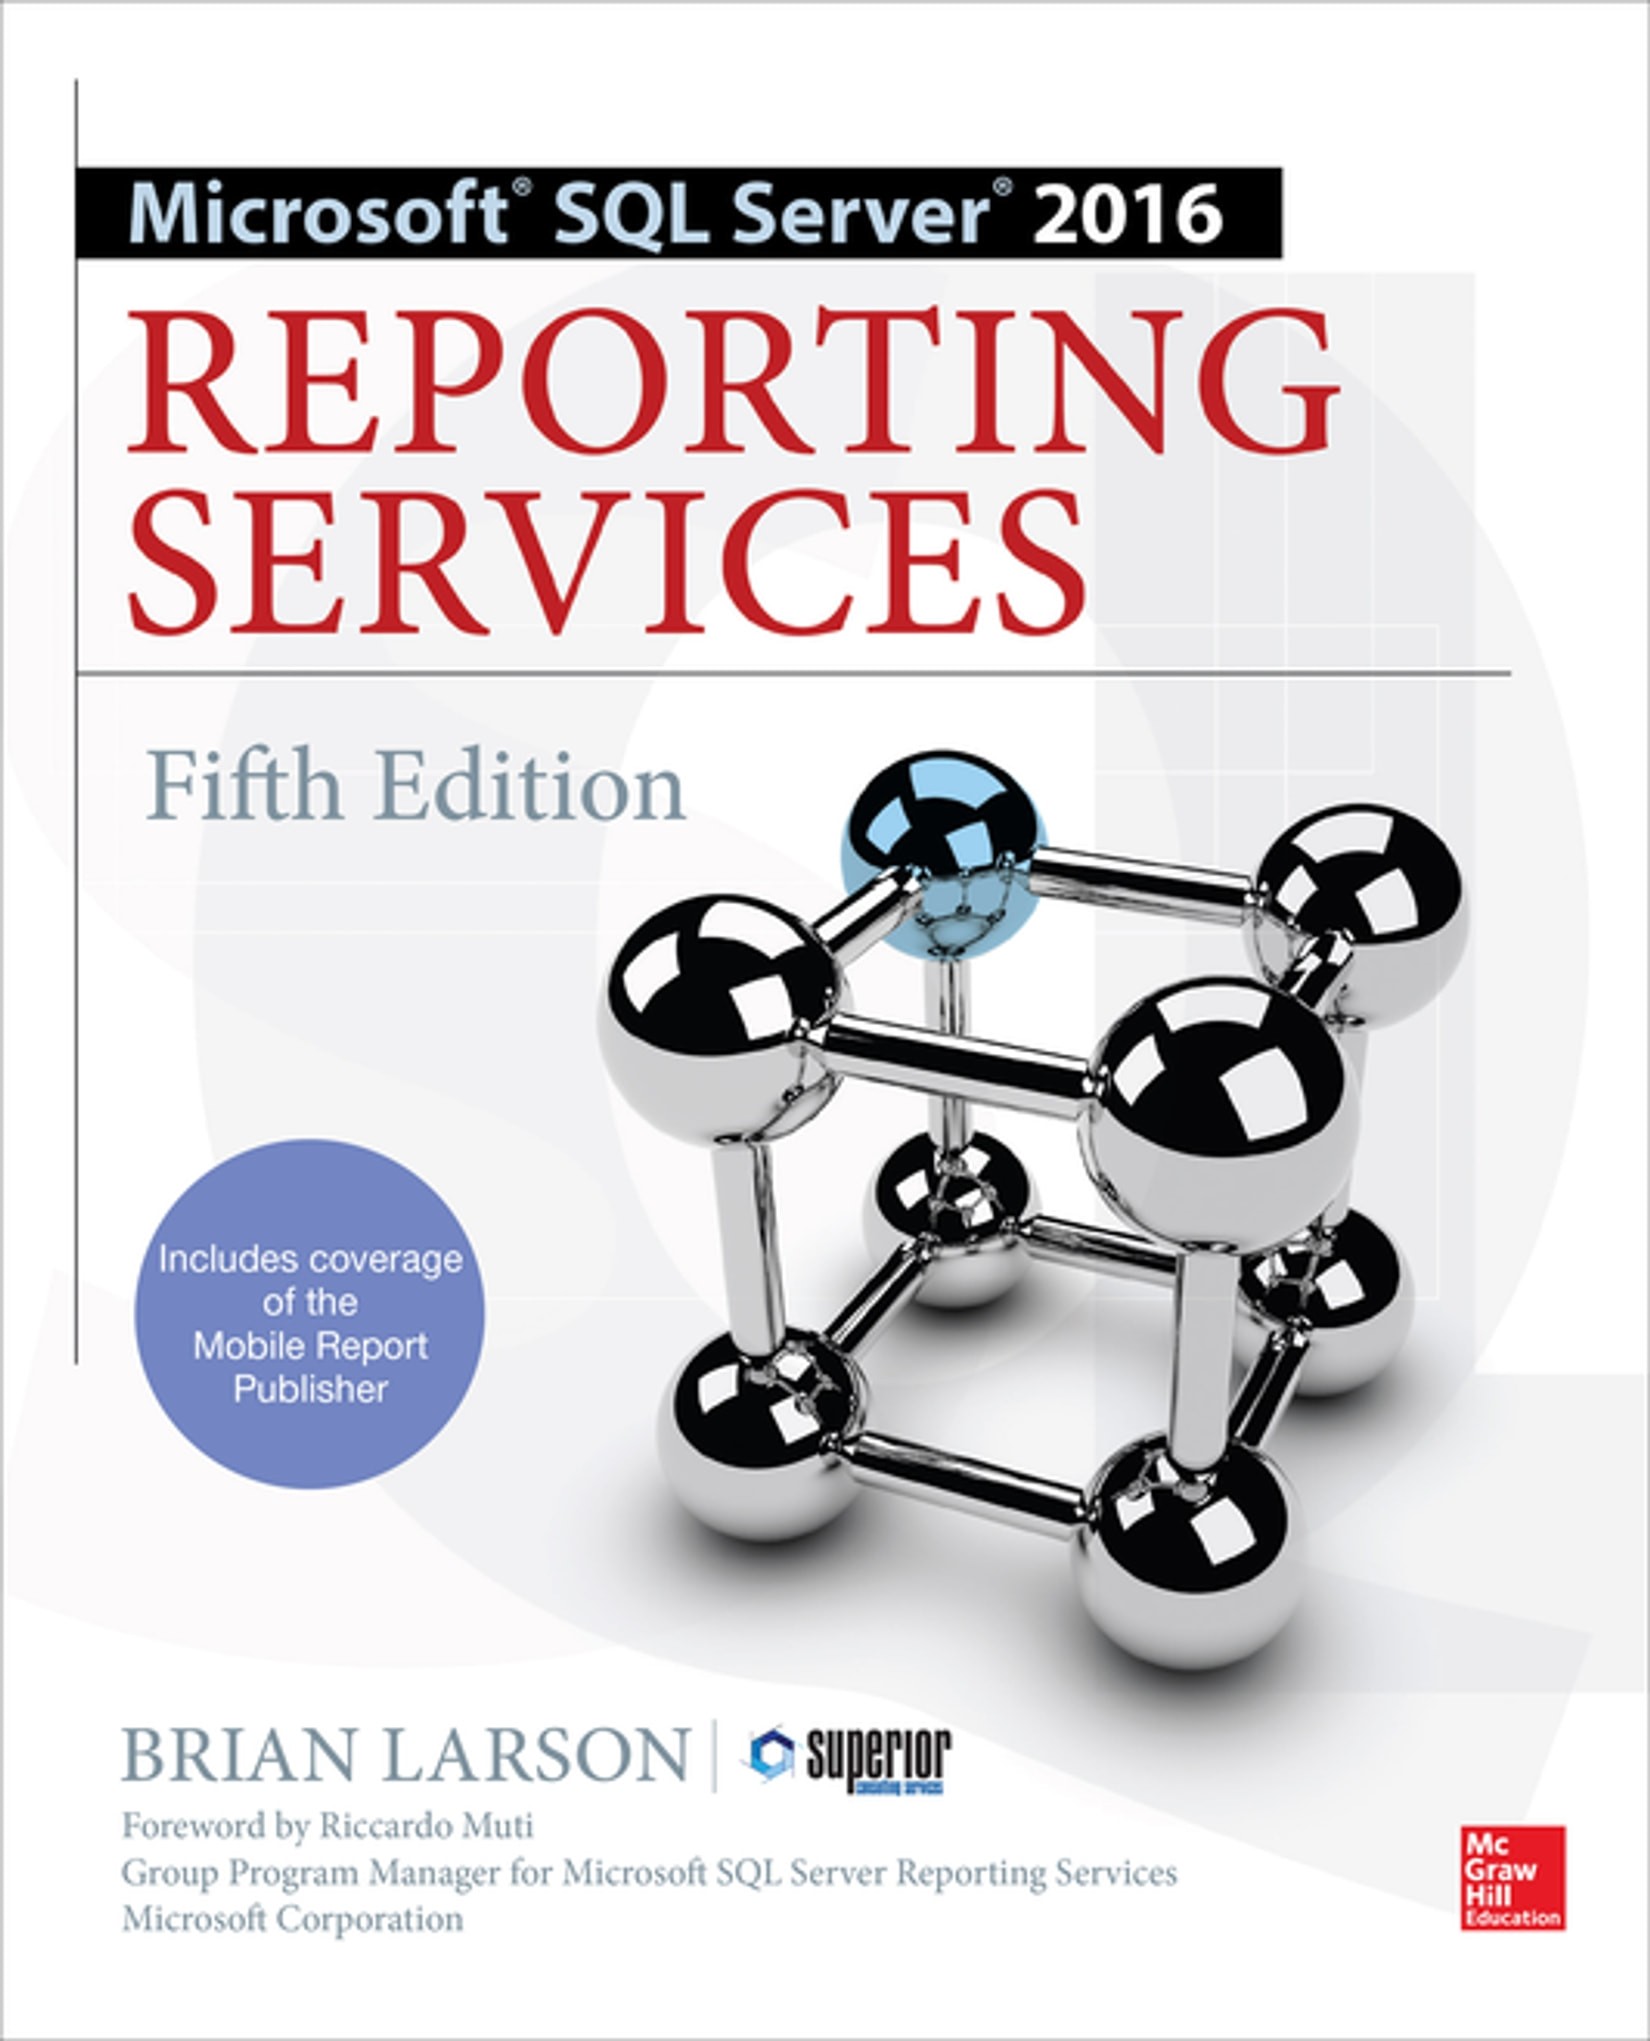 Microsoft SQL Server 2016 Reporting Services, Fifth Edition